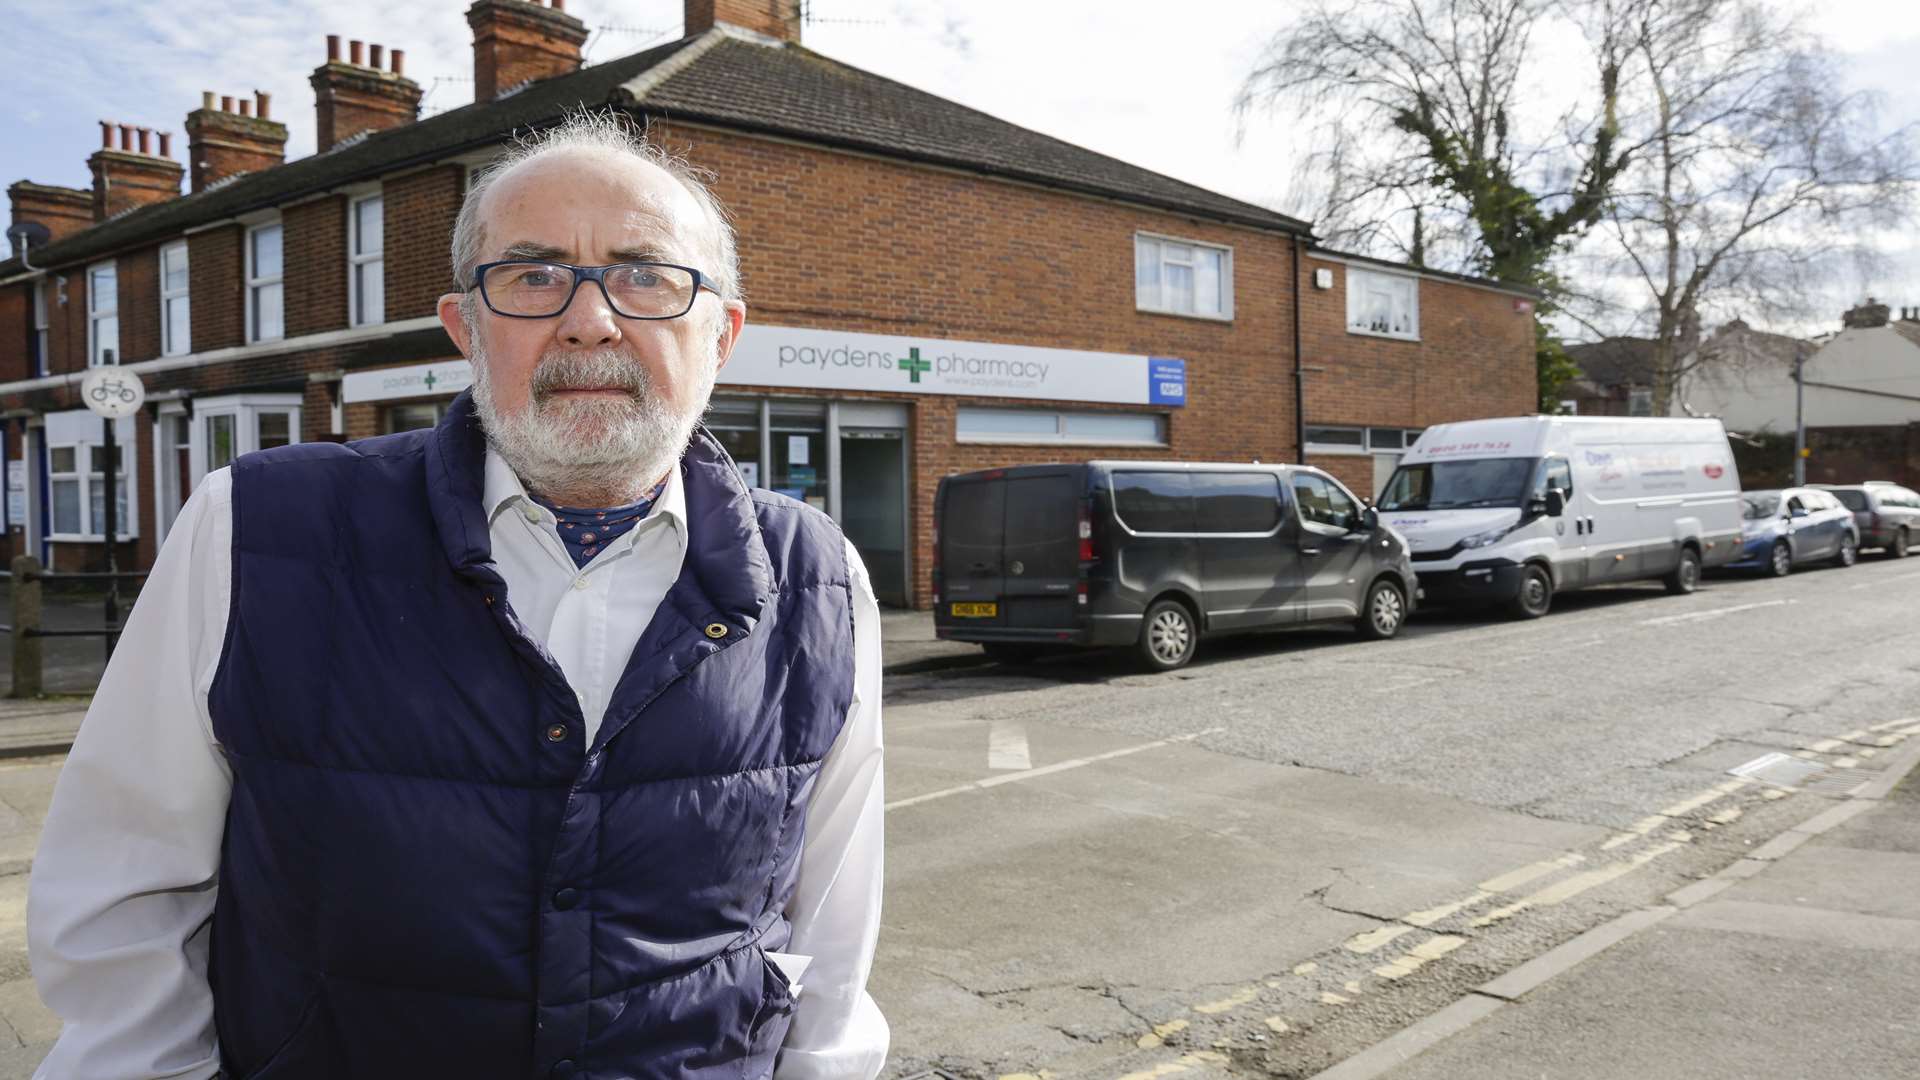 Brian Head is concerned that despite a child being killed when a van was turning in the road here 17 years ago, nothing has been done to make the road safer.